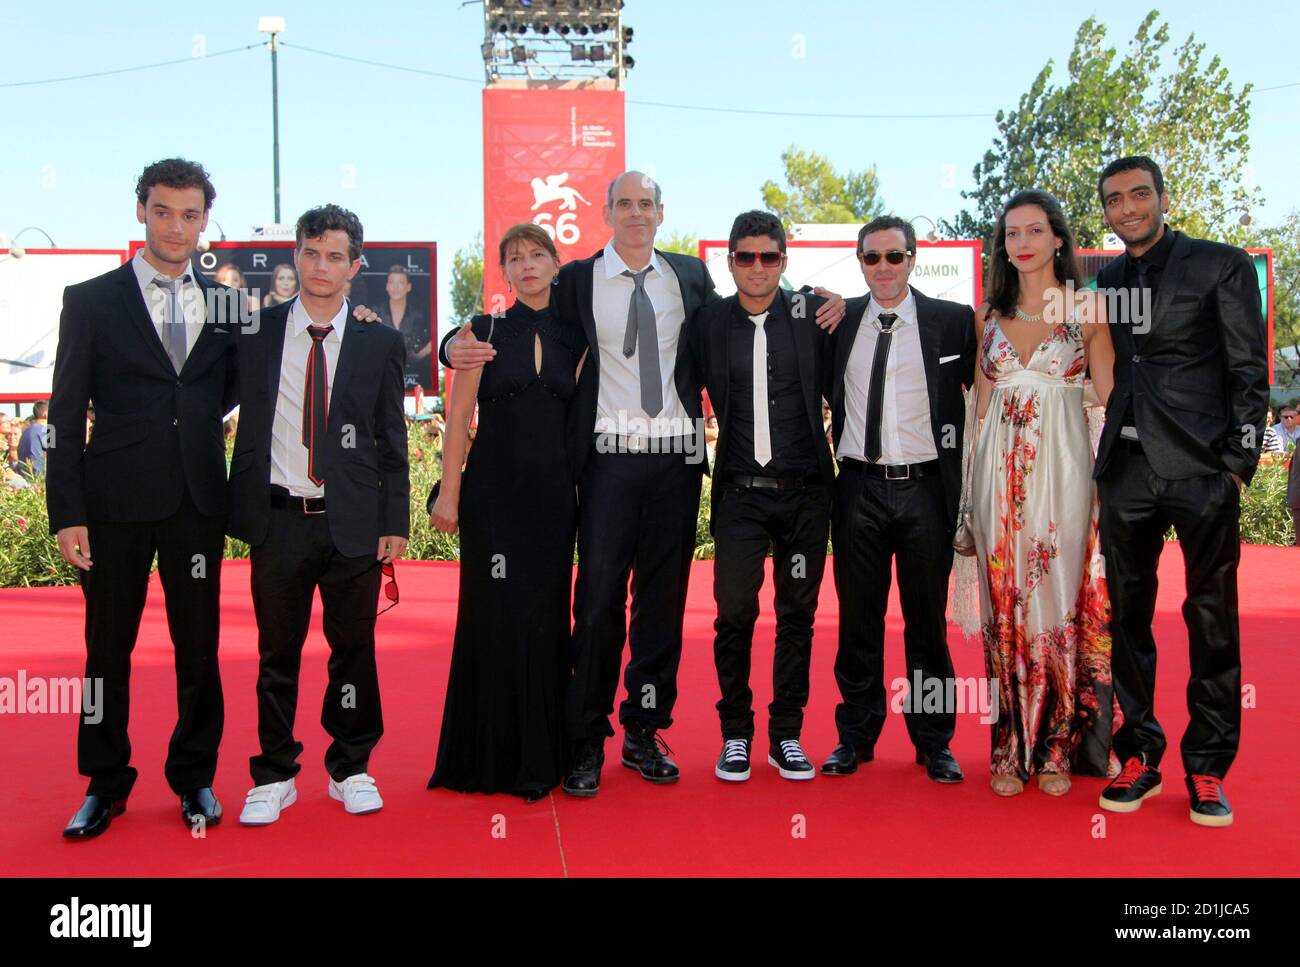 (L to R) Actors Yoav Donat, Michael Moshonov, director Samuel Maoz and his wife, actors Oshri Cohen, Zohar Strauss, Reymonde Amsallem and Dudu Tassa pose during the premiere of 'Lebanon' at the 66th Venice Film Festival September 8, 2009.   REUTERS/Alessandro Bianchi   (ITALY ENTERTAINMENT) Stock Photo